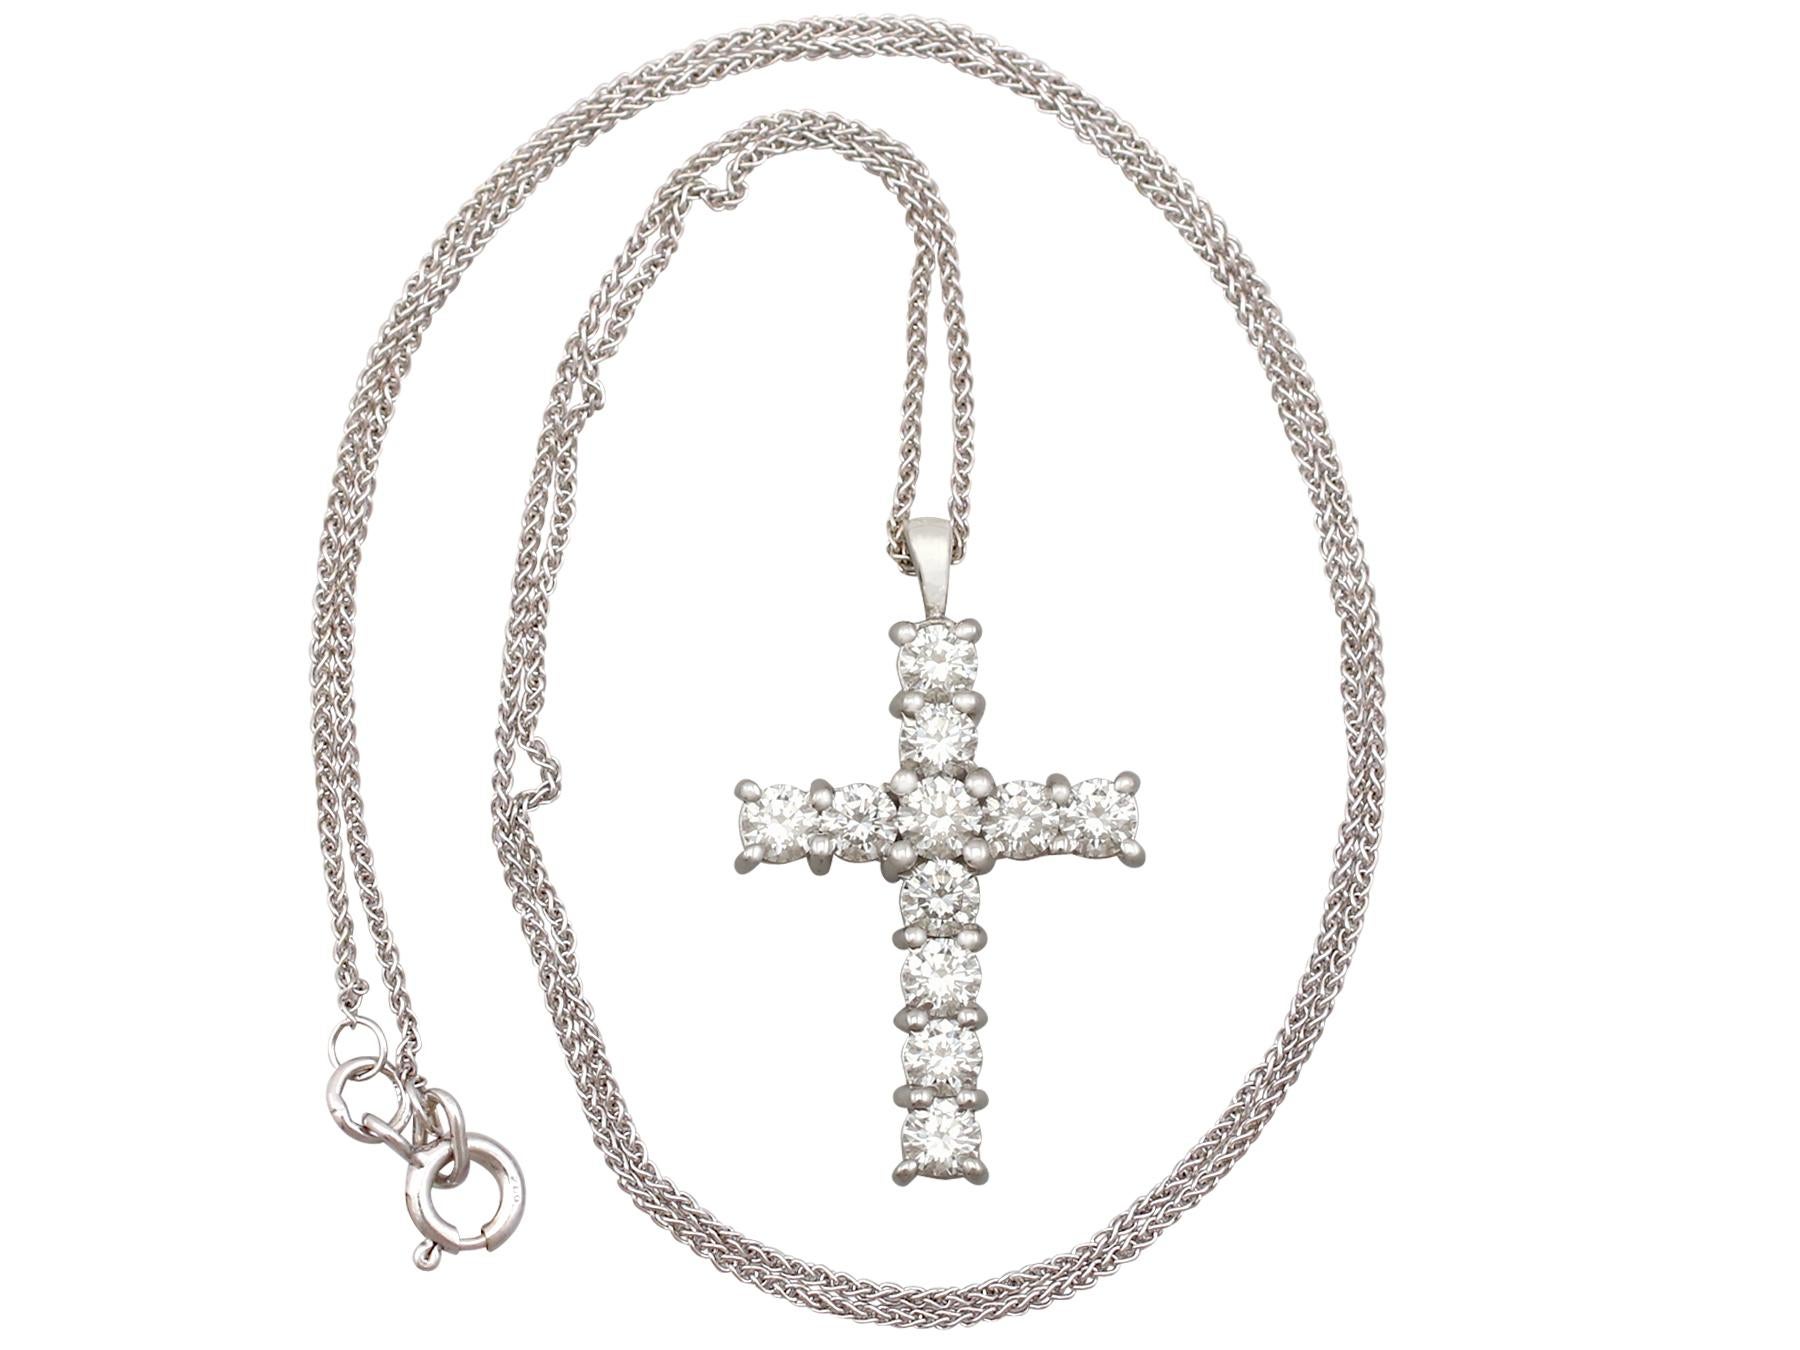 An impressive contemporary 1.65 carat diamond and 18 karat white gold cross pendant and spiga chain; part of our diverse diamond jewelry and estate jewelry collections.

This fine and impressive contemporary diamond pendant has been crafted in 18k